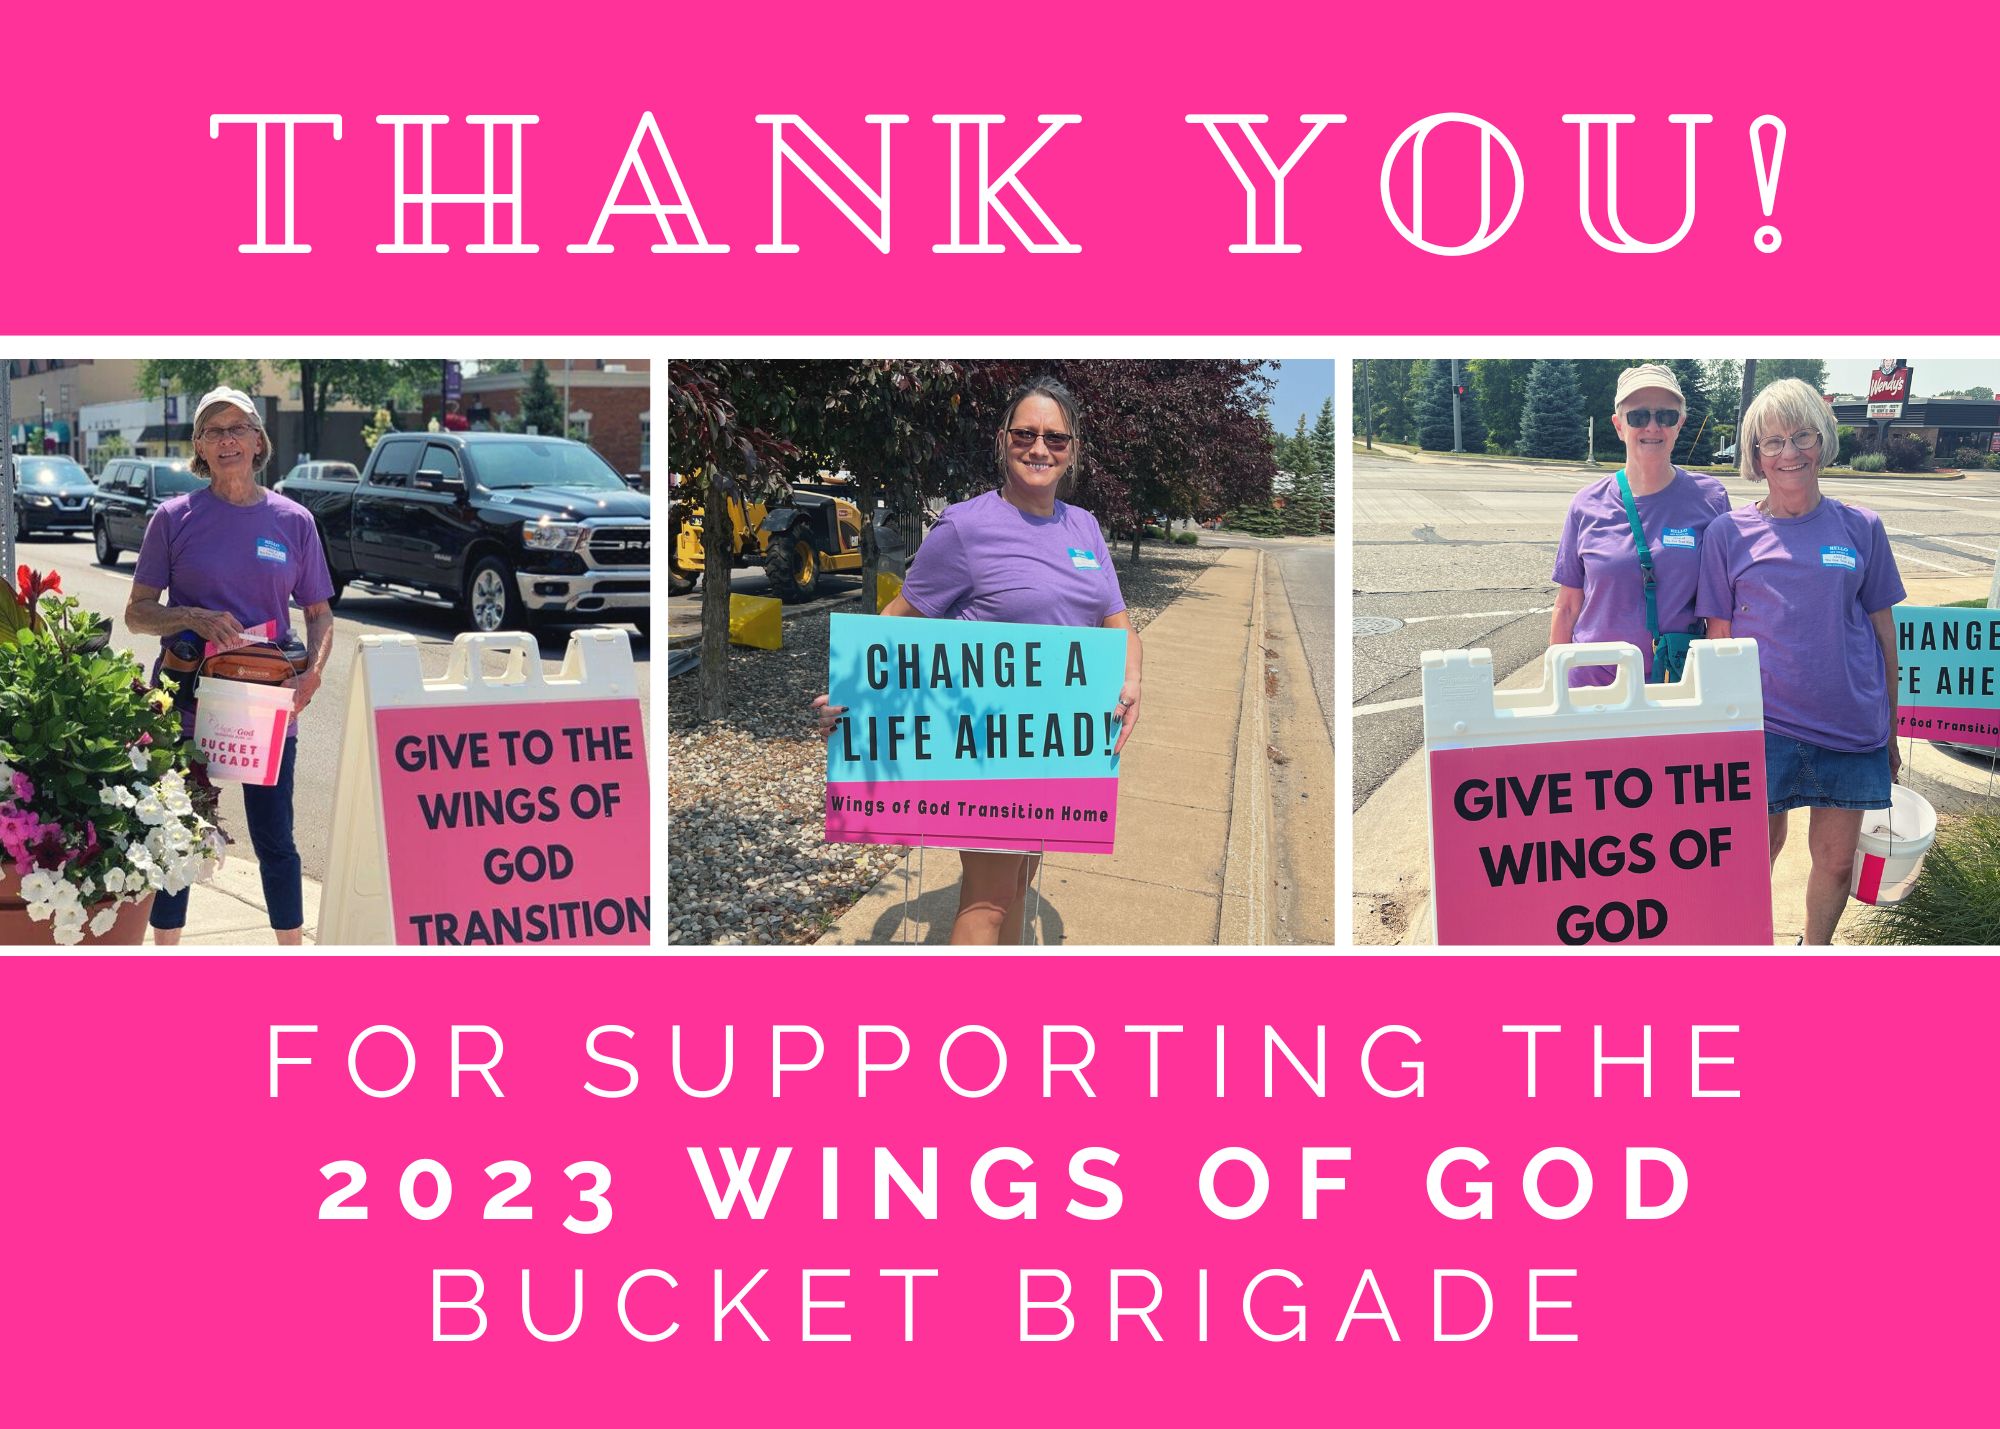 Thank you for supporting the Wings of God Bucket Brigade